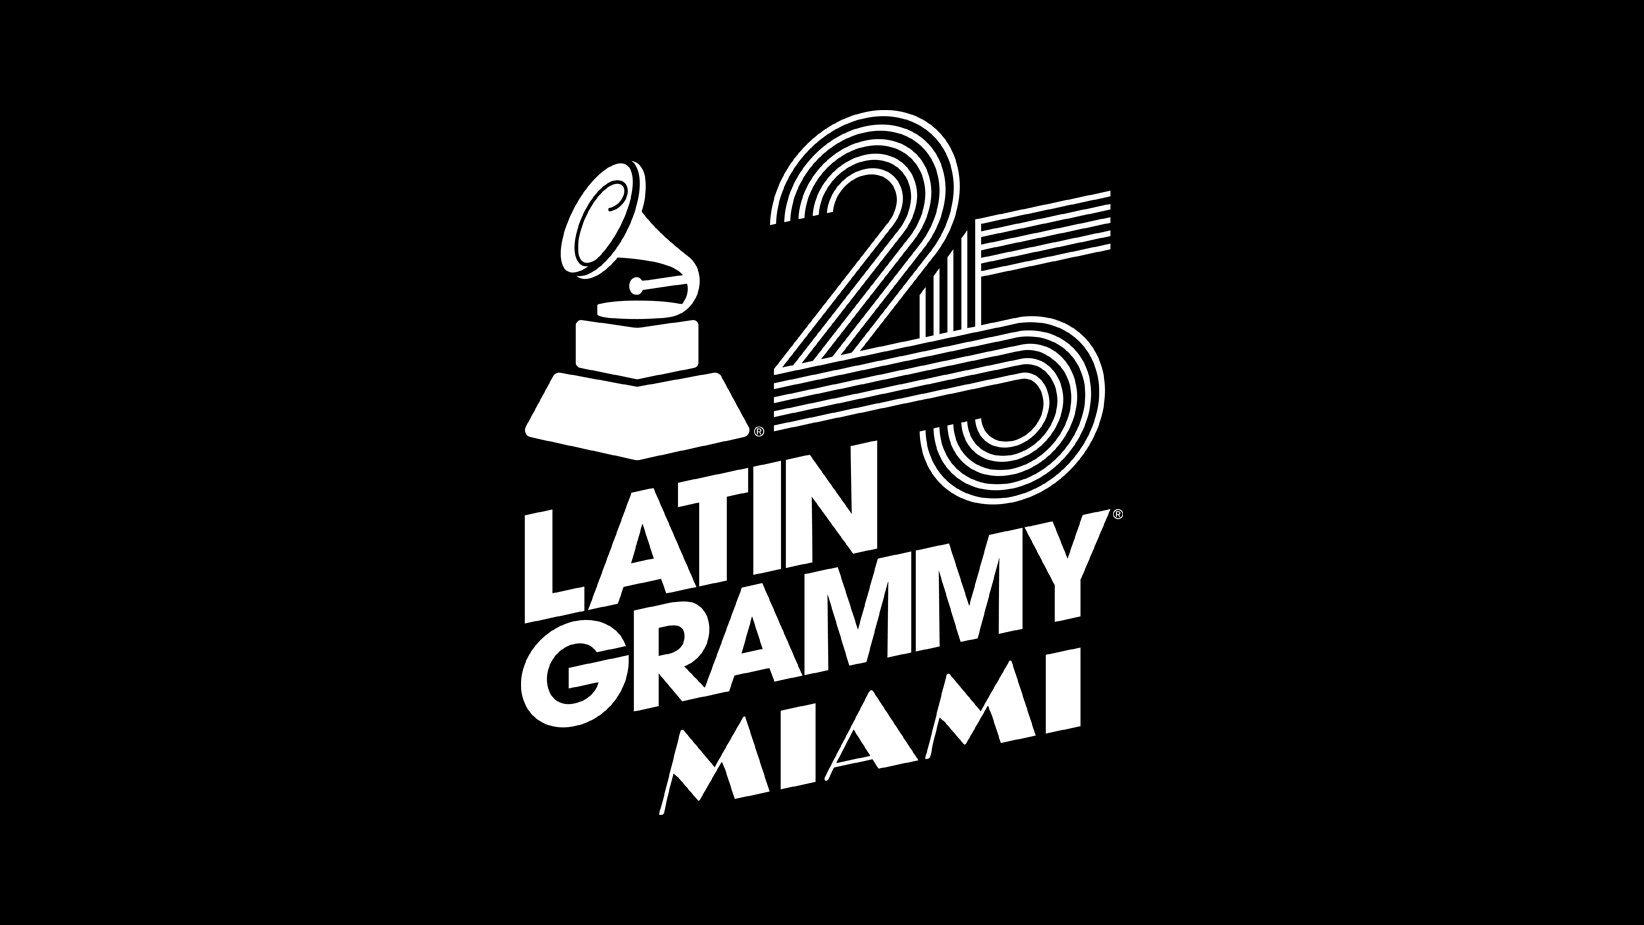 Graphic featuring the logo for the 2024 Latin GRAMMYs, officially known as the 25th Latin GRAMMY Awards, taking place on Nov. 14, in Miami at Kaseya Center. The logo says "Latin GRAMMY Miami" and features a Latin GRAMMY Award statue and the number 25.